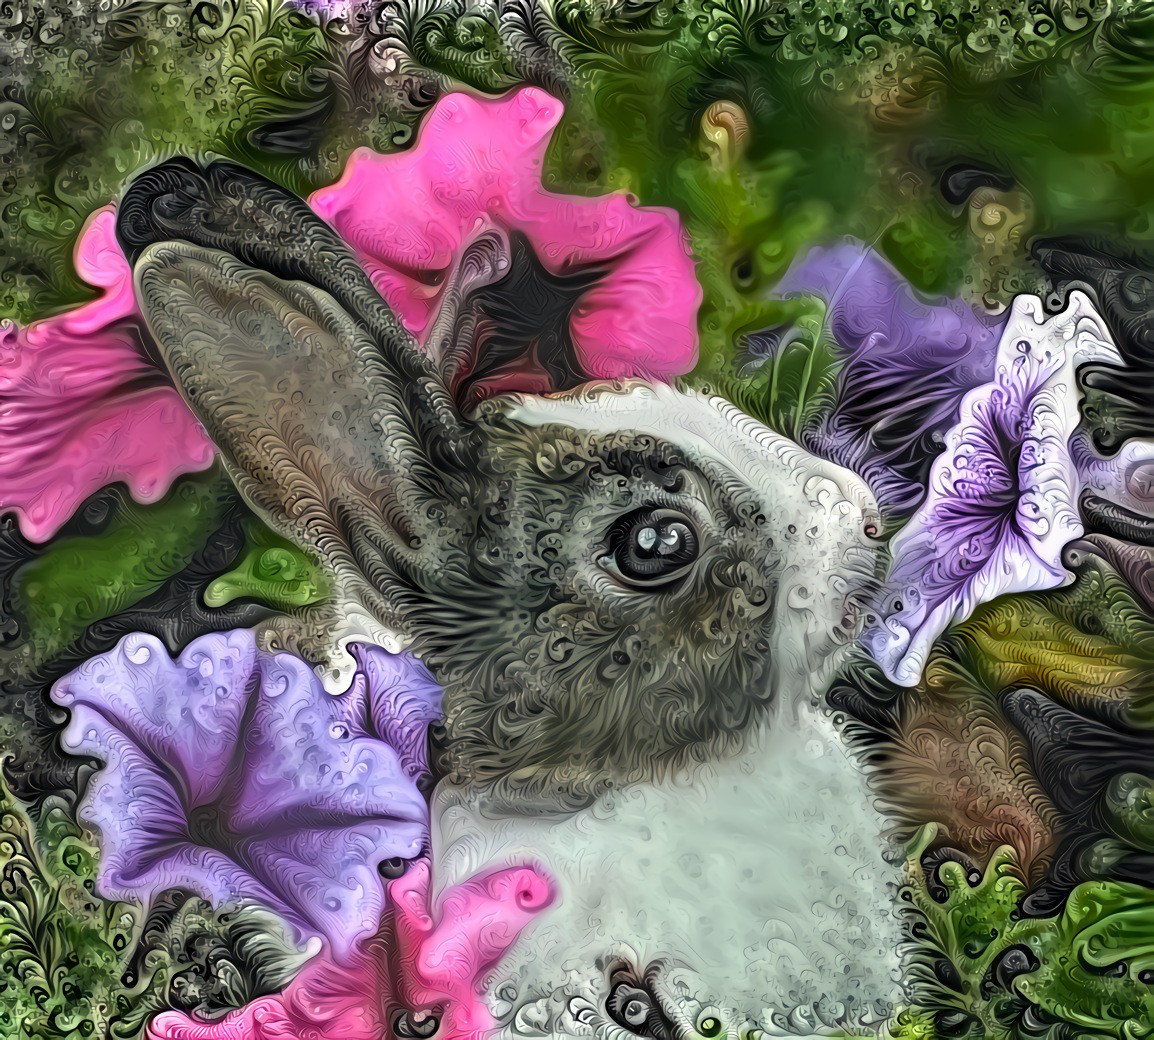 Happy Easter to Everybunny! ;^}